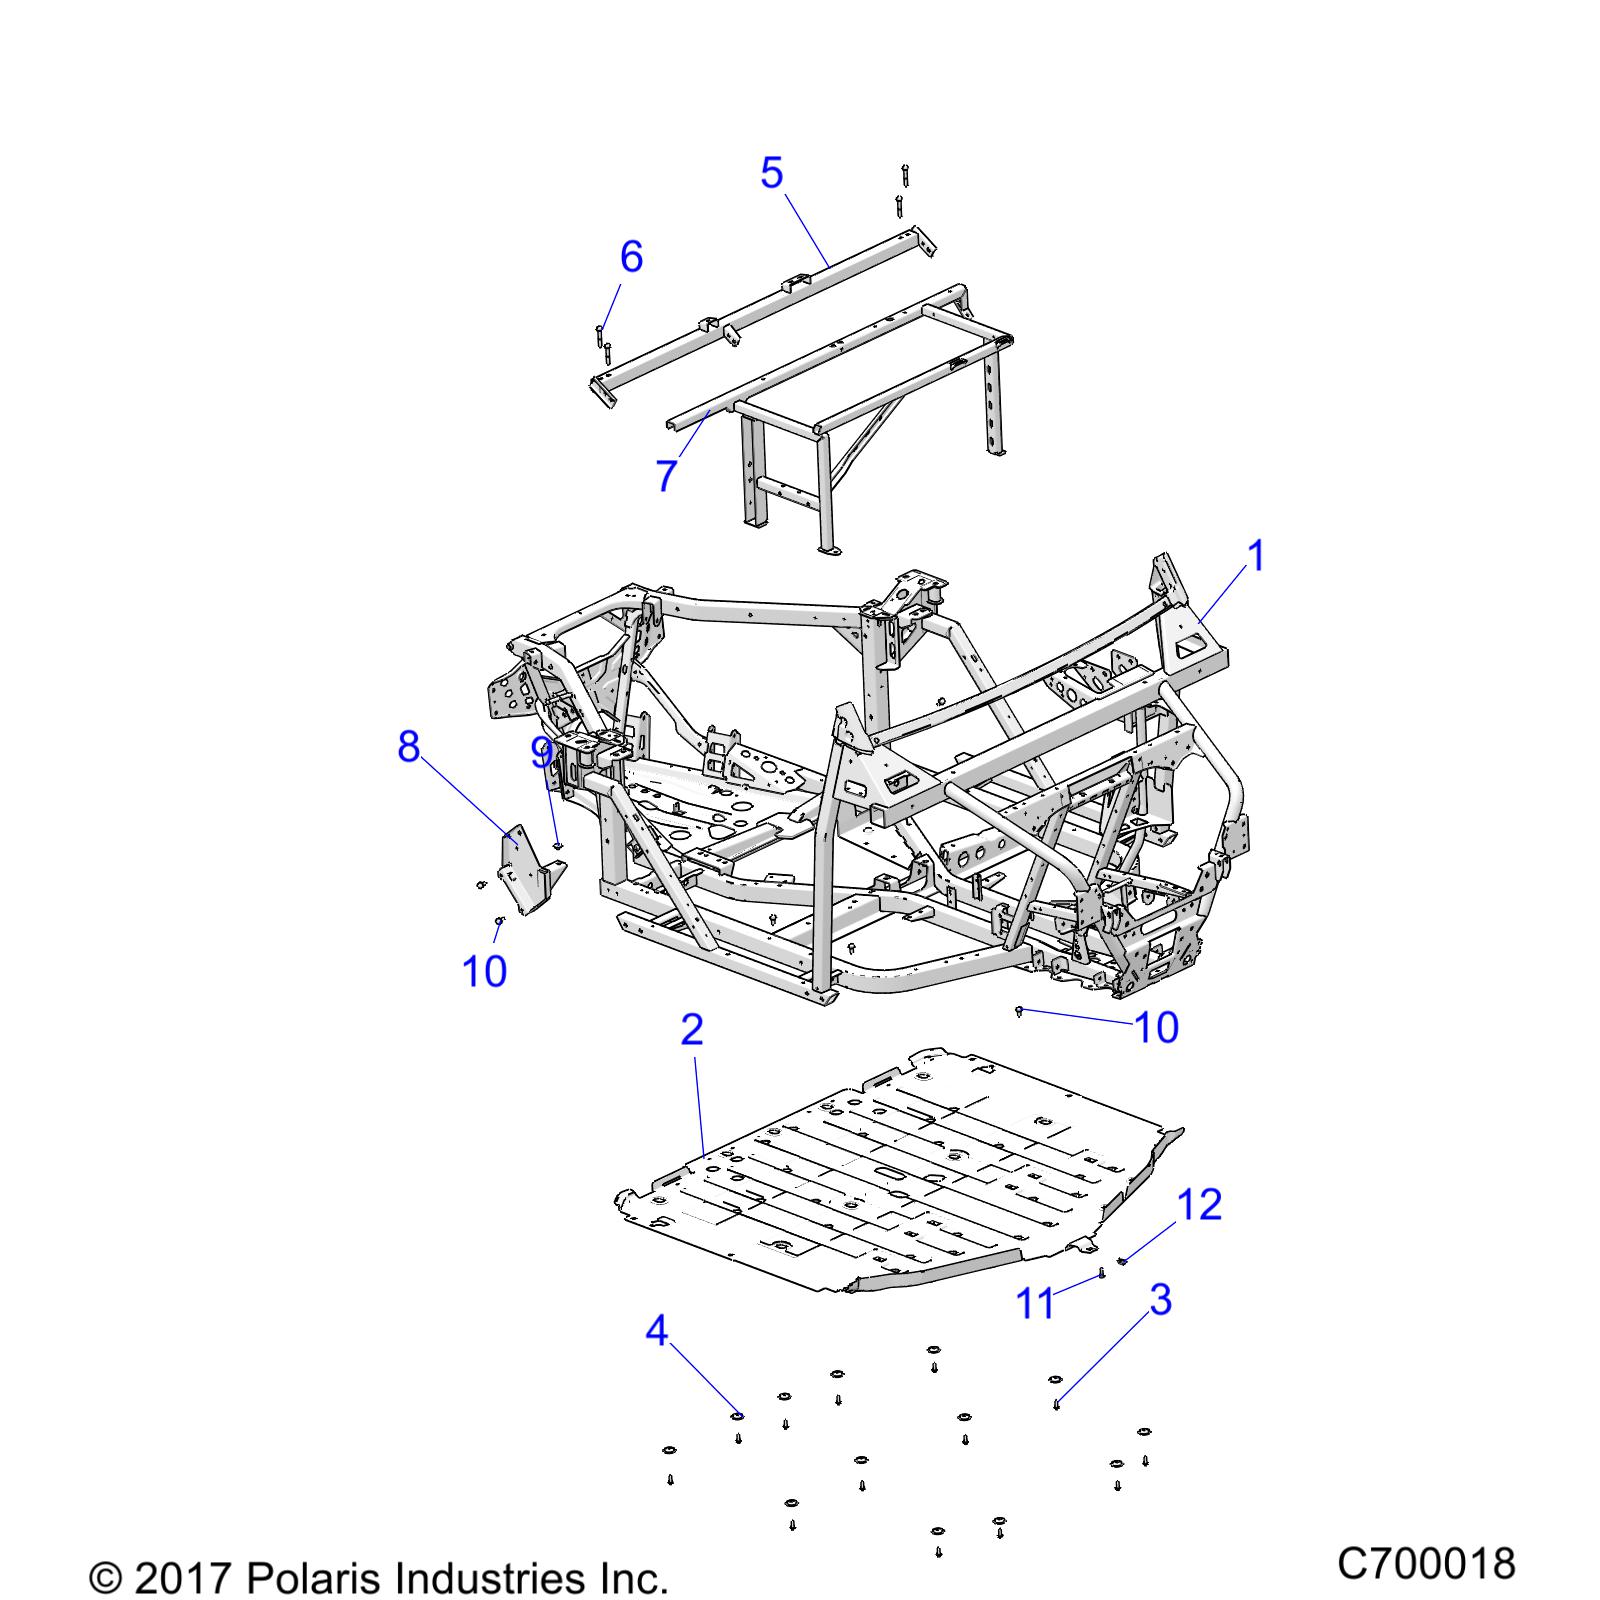 CHASSIS, MAIN FRAME AND SKID PLATES - R20RRED4F1/N1/SD4C1 (C700018)